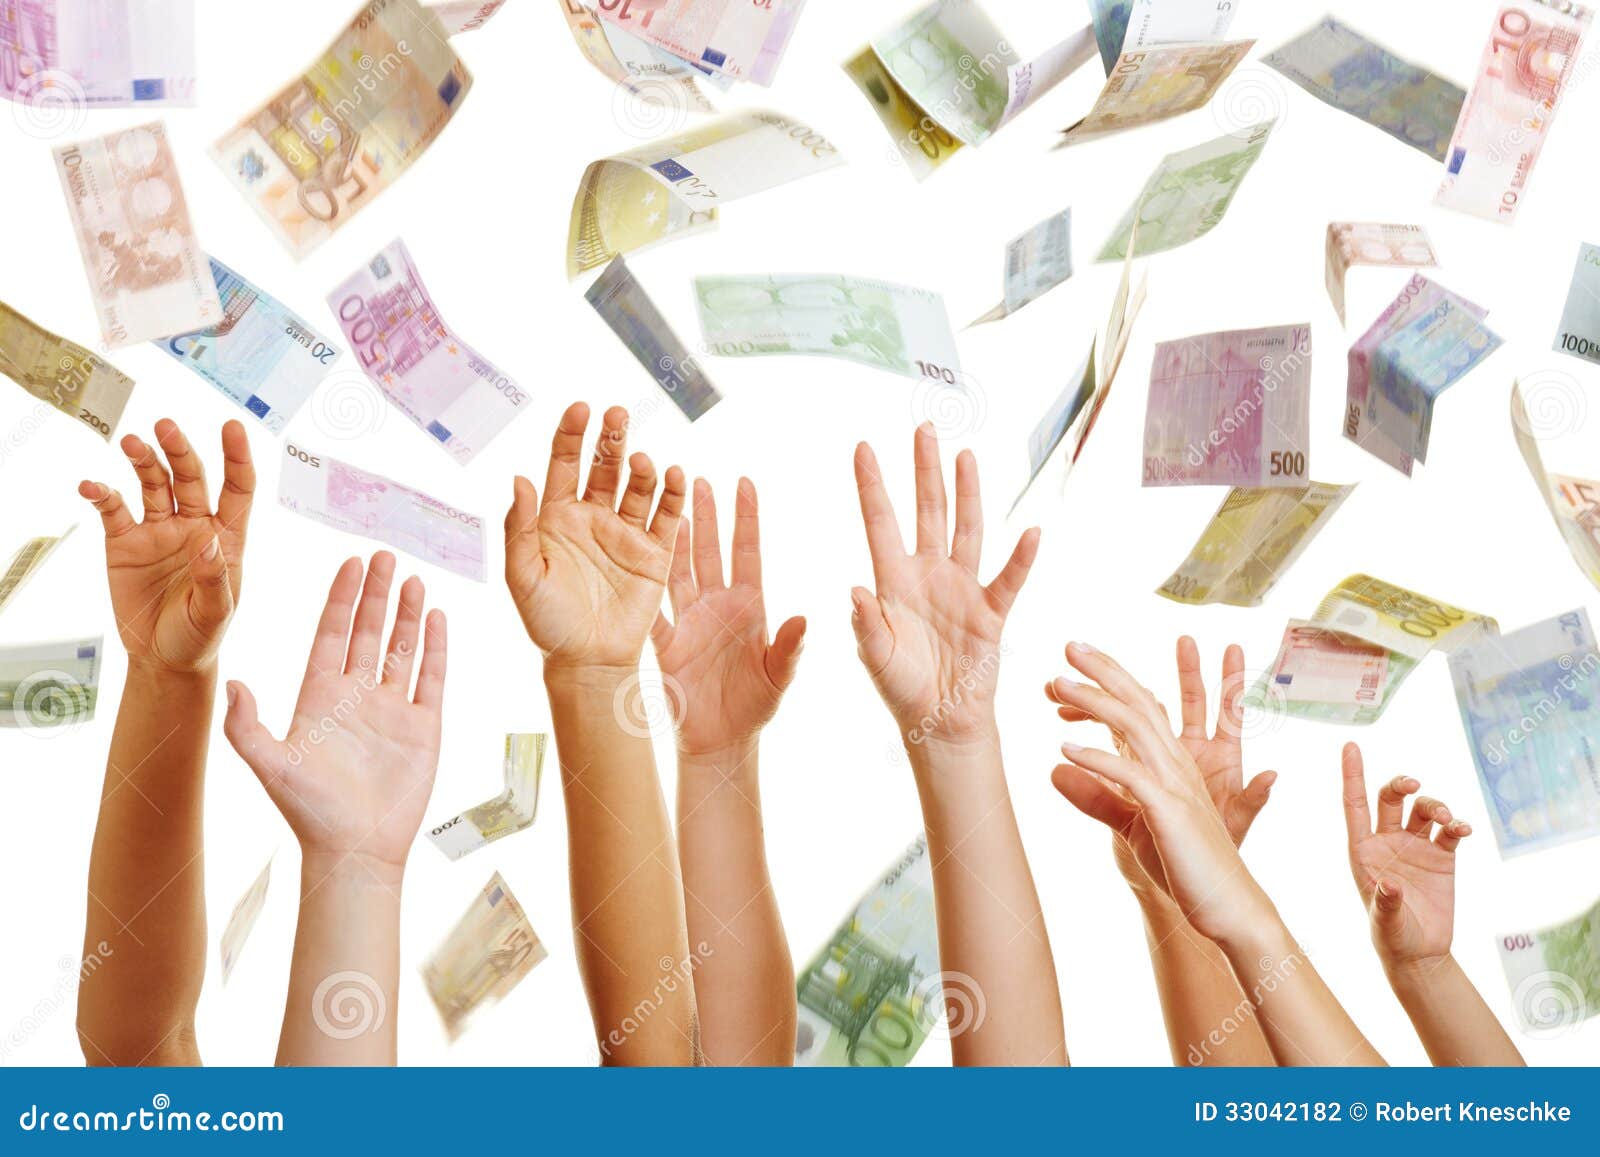 Hands Reaching For Flying Euro Money Stock Photo - Image of concept, happy: 33042182